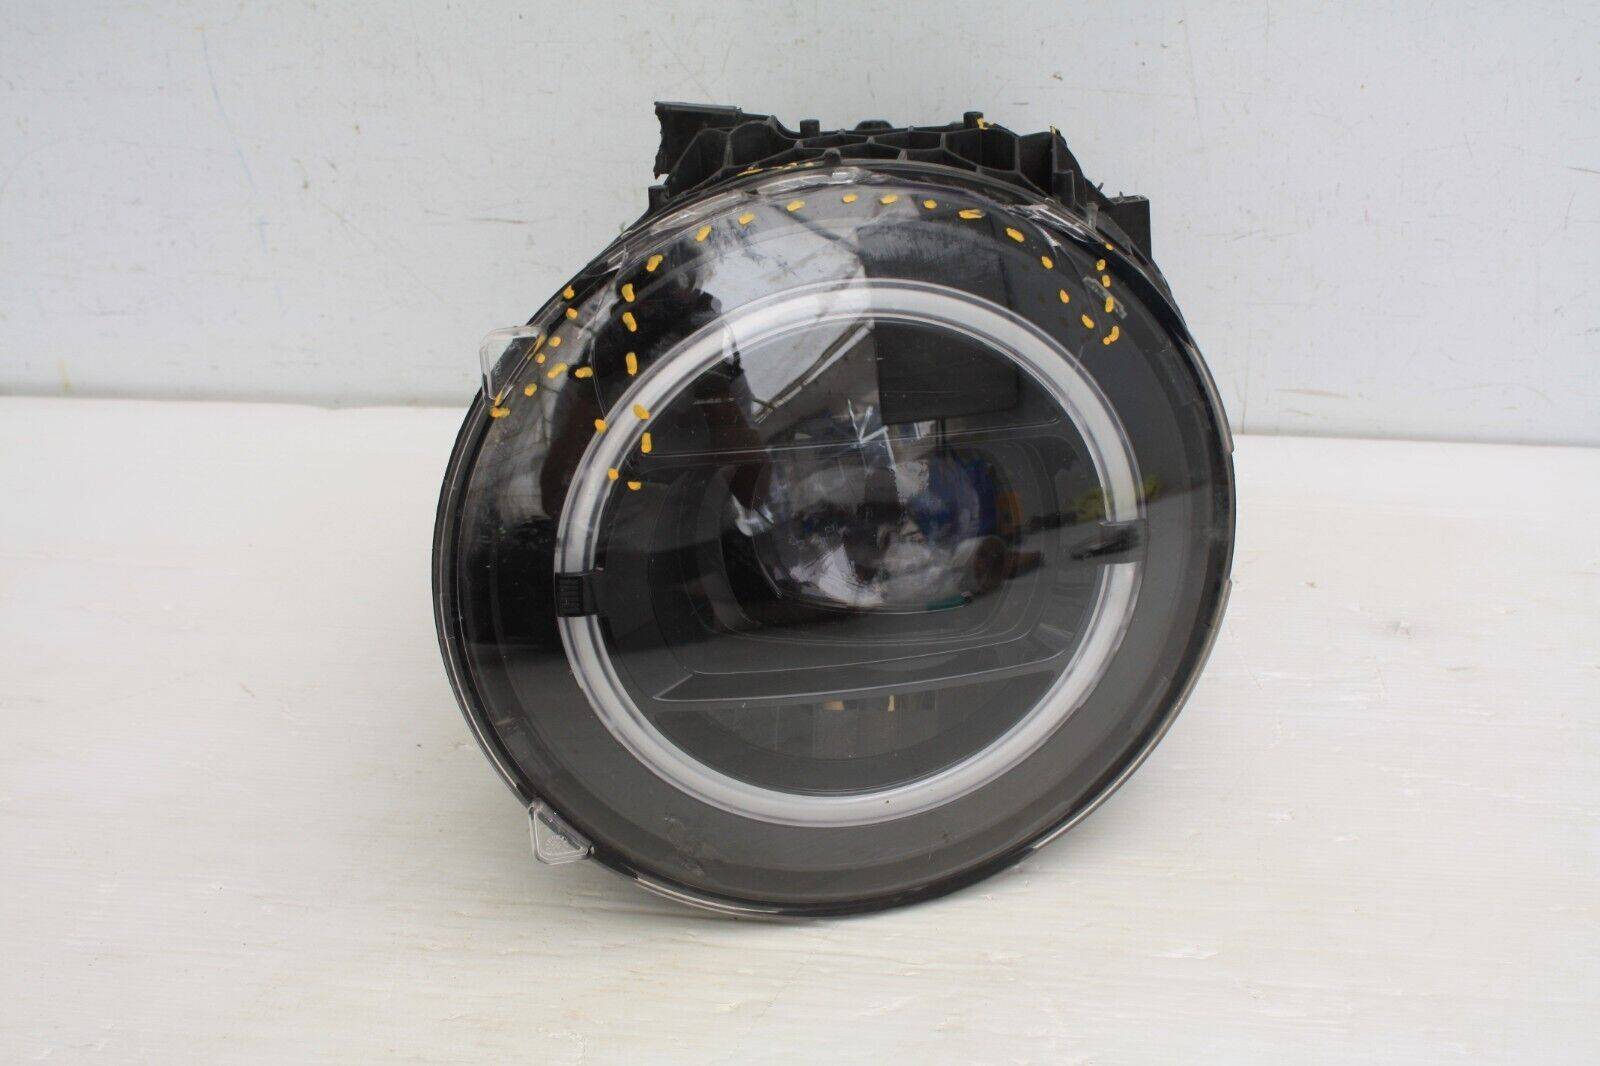 Mercedes G Class W463 Right Side LED Headlight A4639067602 PARTS OR REPAIRS 175769127925